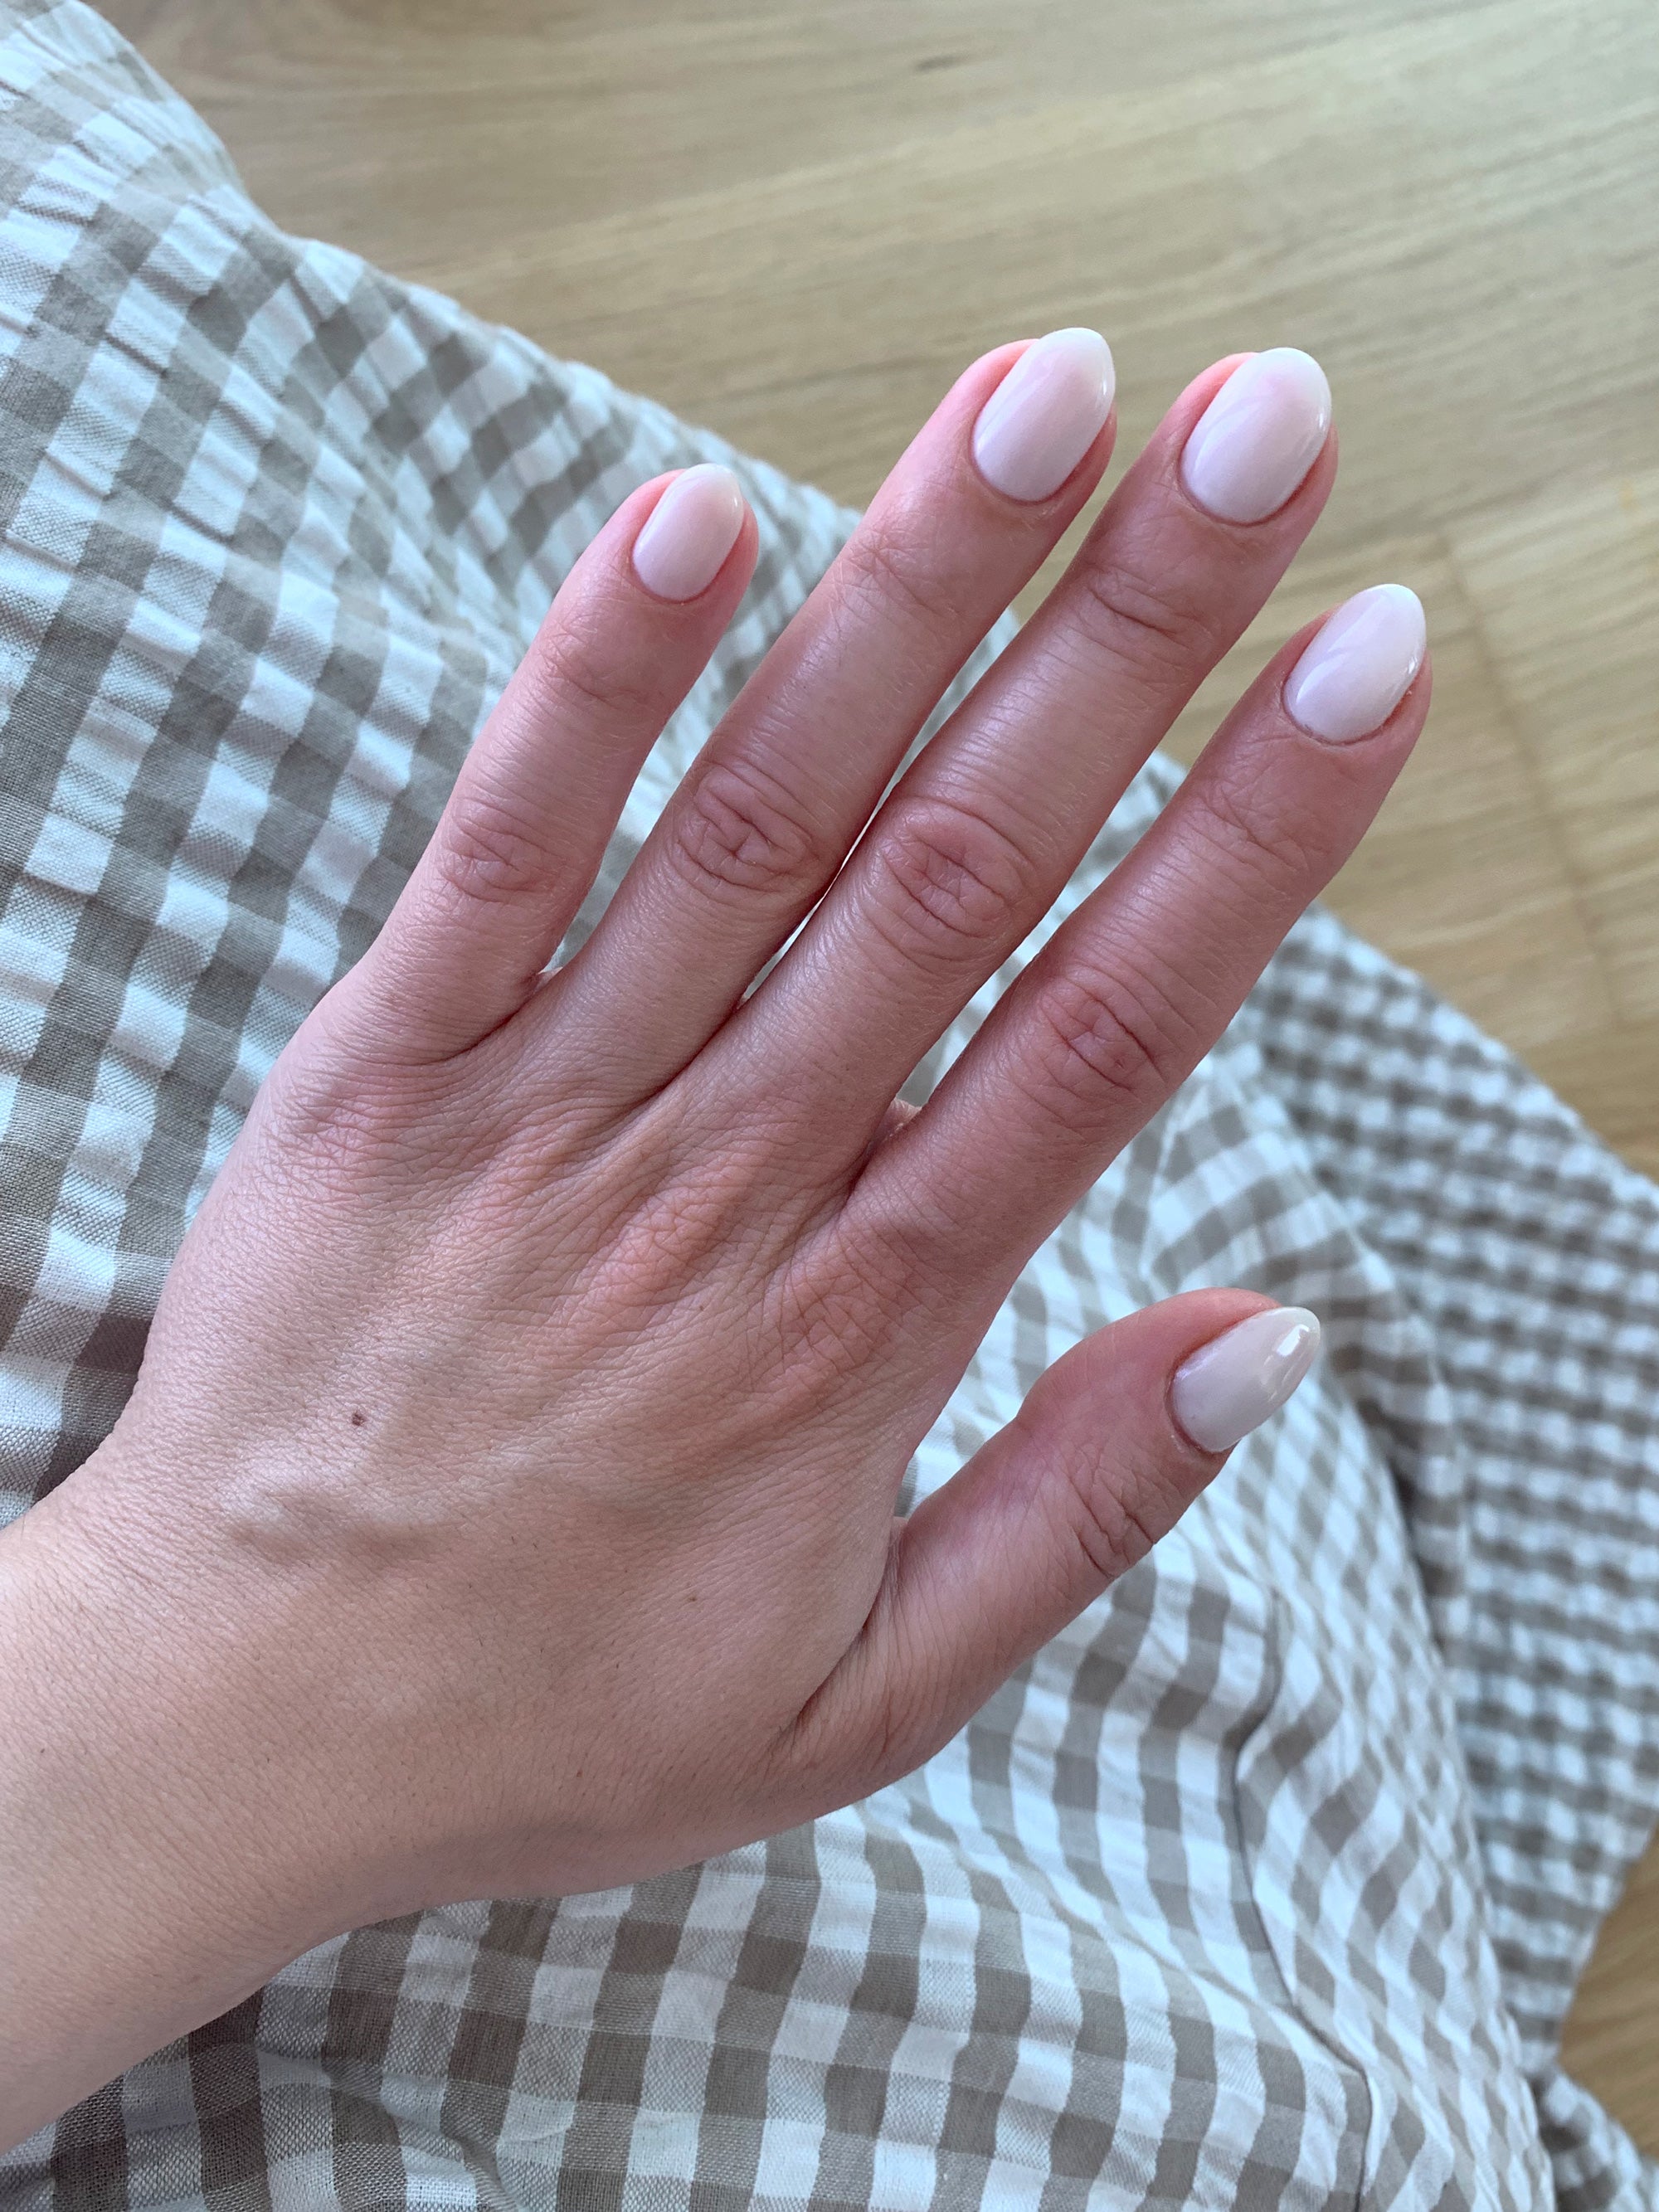 Get Sofia Richie's Blueberry Milk Nails | Gallery posted by The Clear Cut |  Lemon8